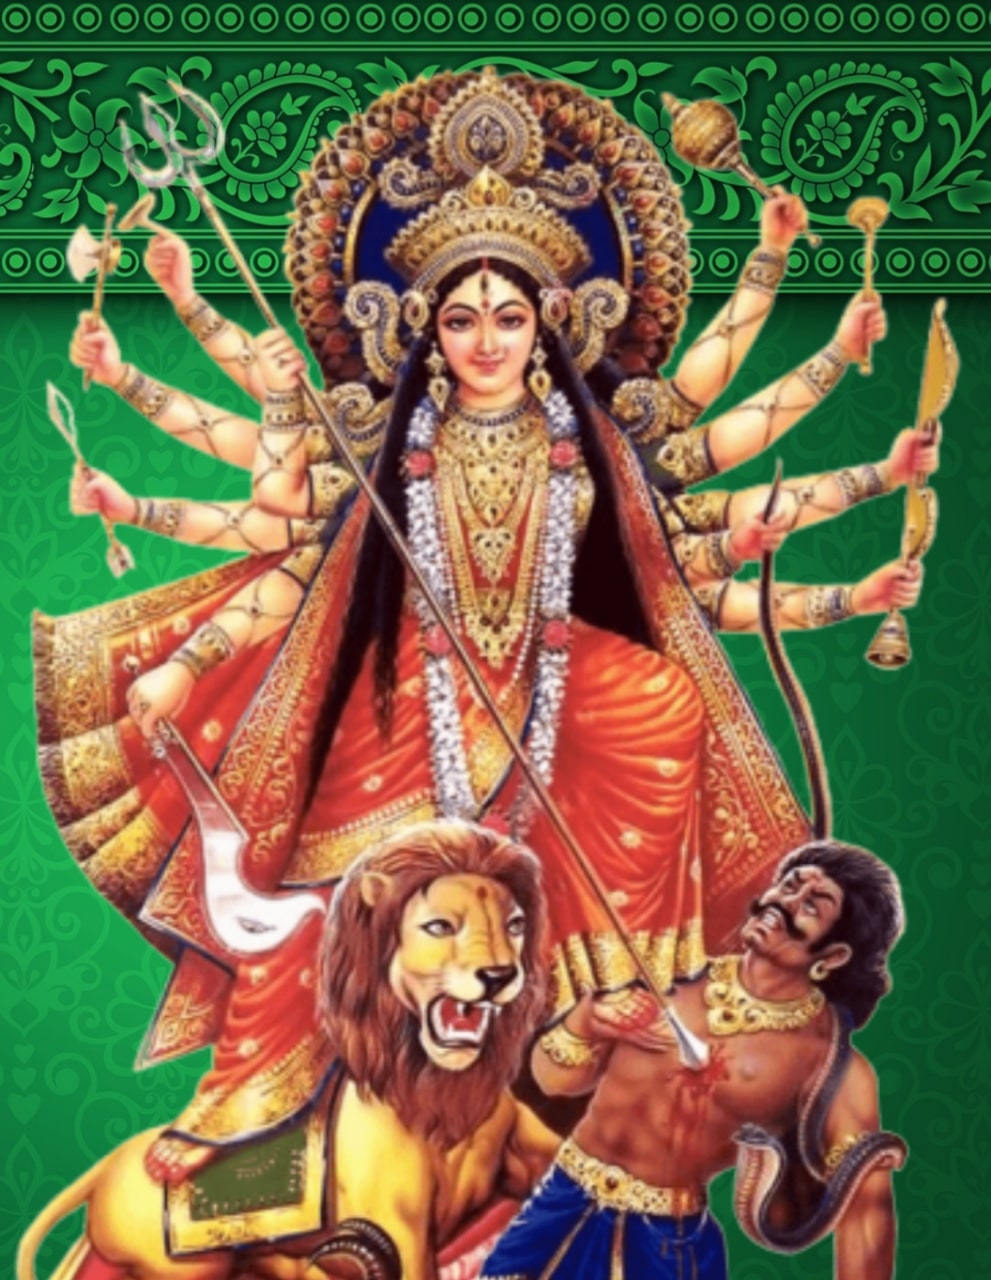 happy navratri images for whatsapp hd